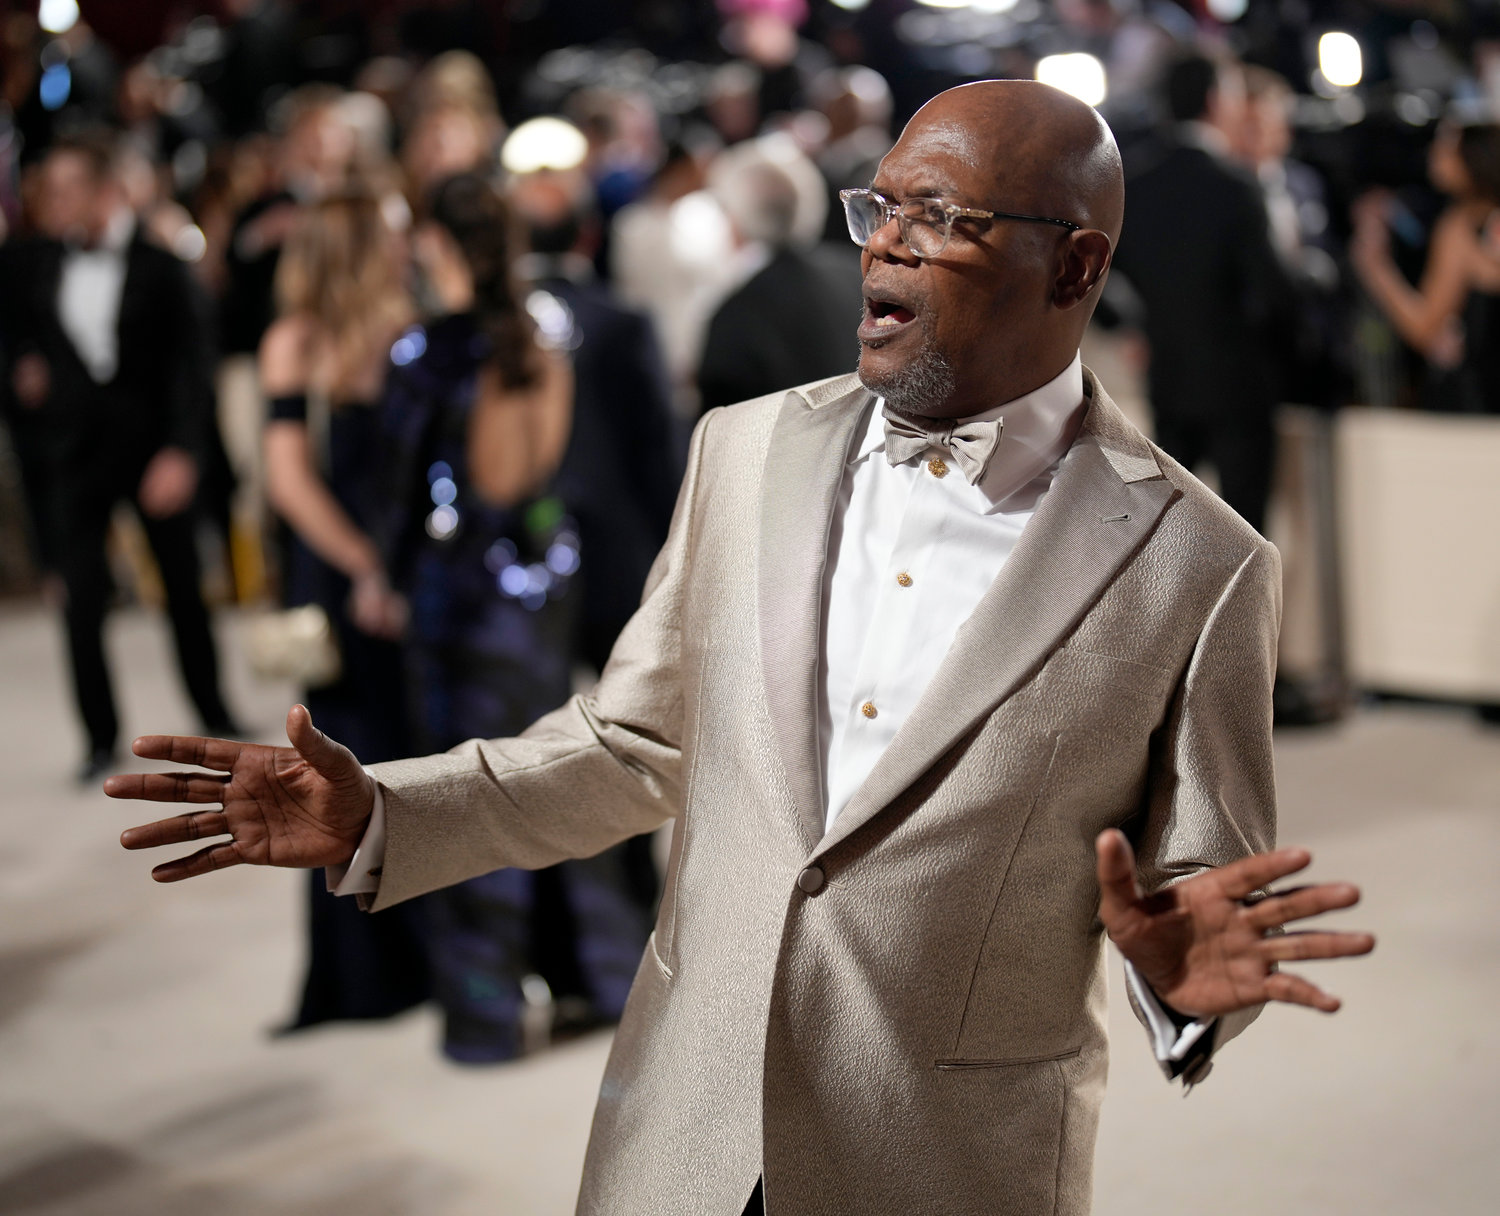 Samuel L. Jackson arrives at the Oscars on Sunday, March 12, 2023, at the Dolby Theatre in Los Angeles. (AP Photo/John Locher)